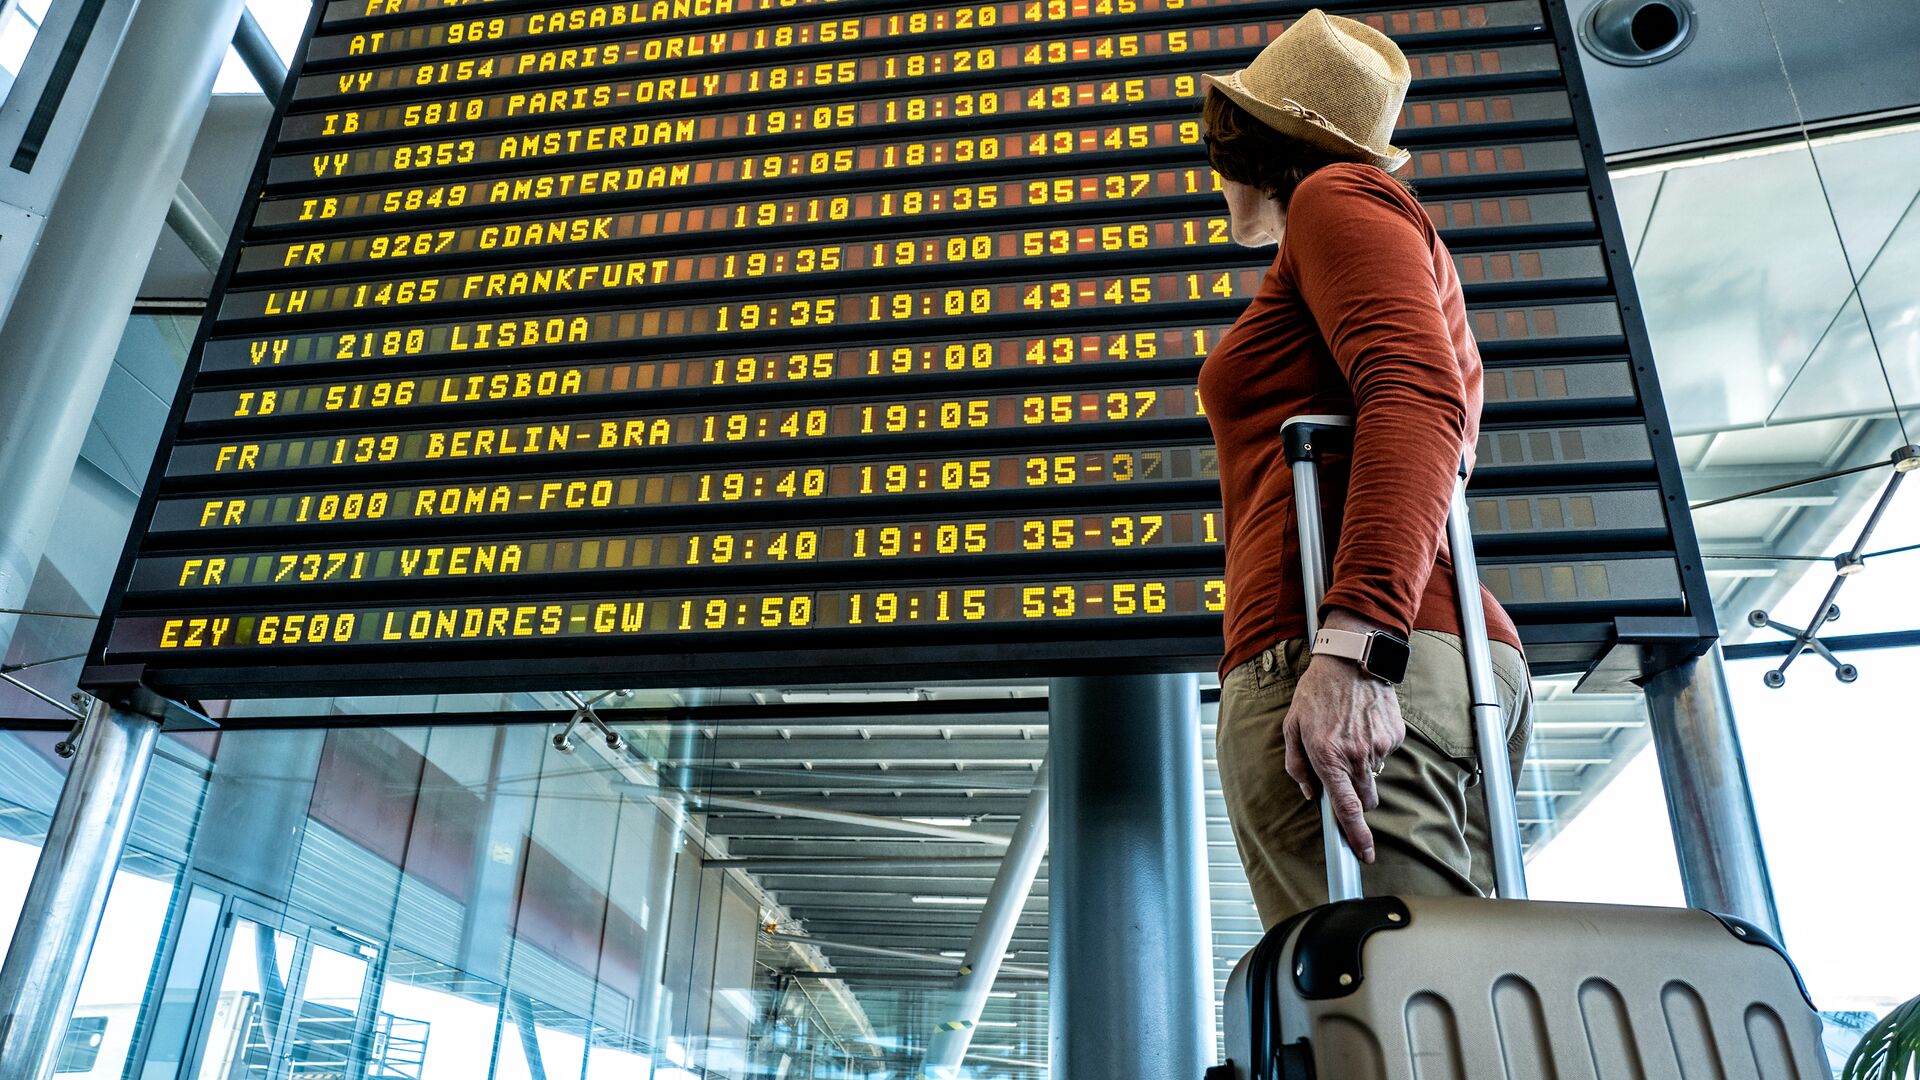 Female traveler with luggage in tow is looking at flight information which details flights travelling around the world.